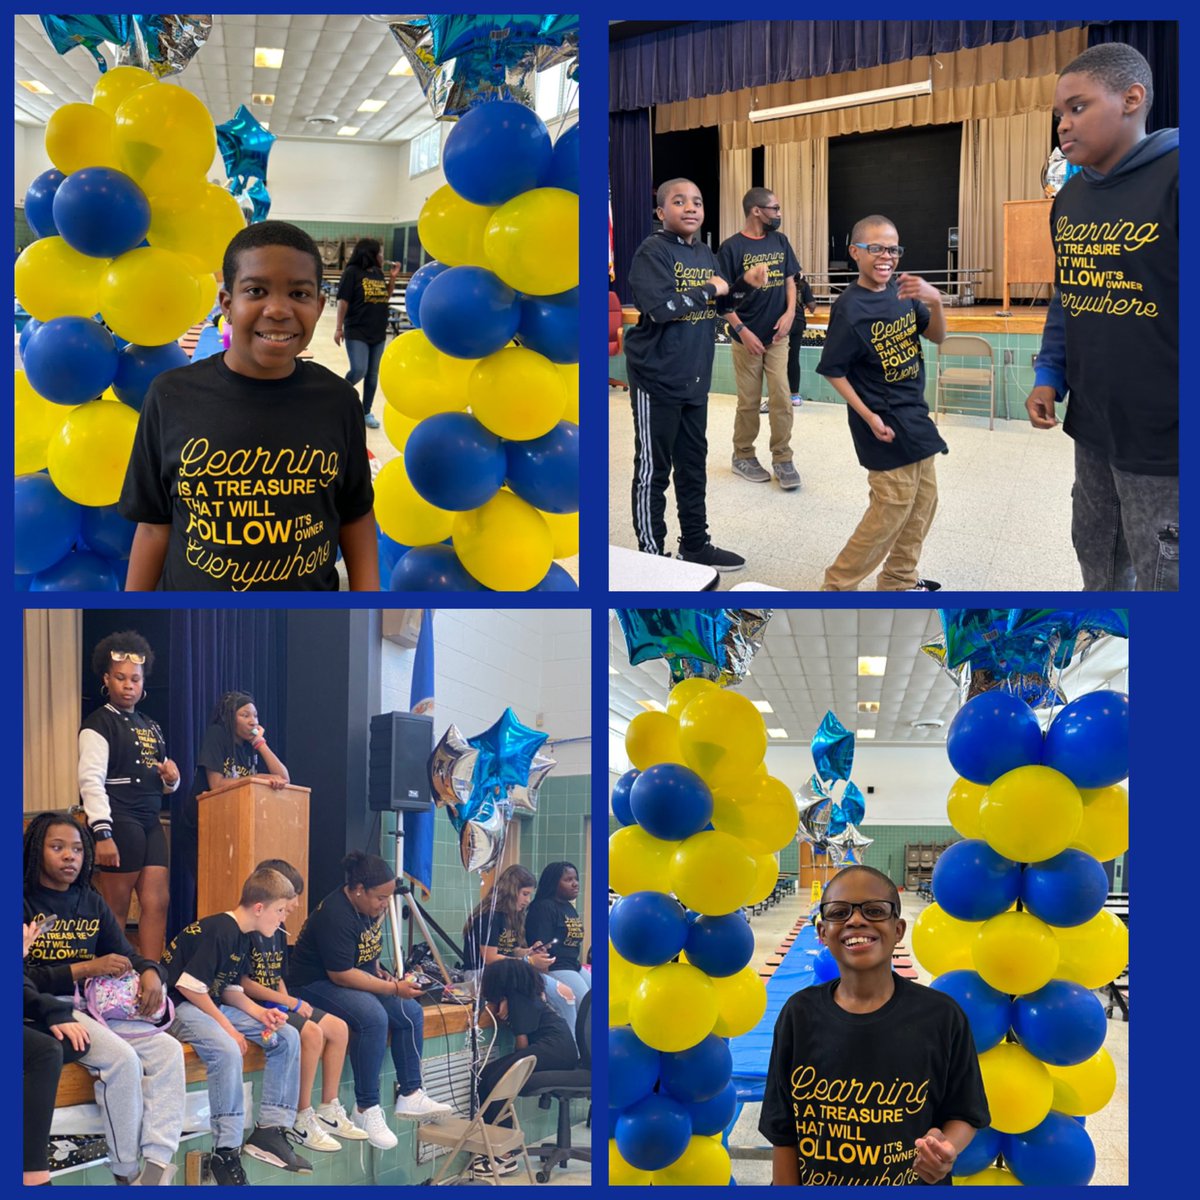 @WESBluejays 6th grade social was fun for our little bluejays💙💛#PPSshines @LBrown_PPS @Brenda21580279 @trac_lyn @cjwillis23 @bigred4490 @morbull757 @rye723 @MelCouther @EthelKS58 @TinikaDawson @hmeducate @LadyKarenT @JaylynRichard24